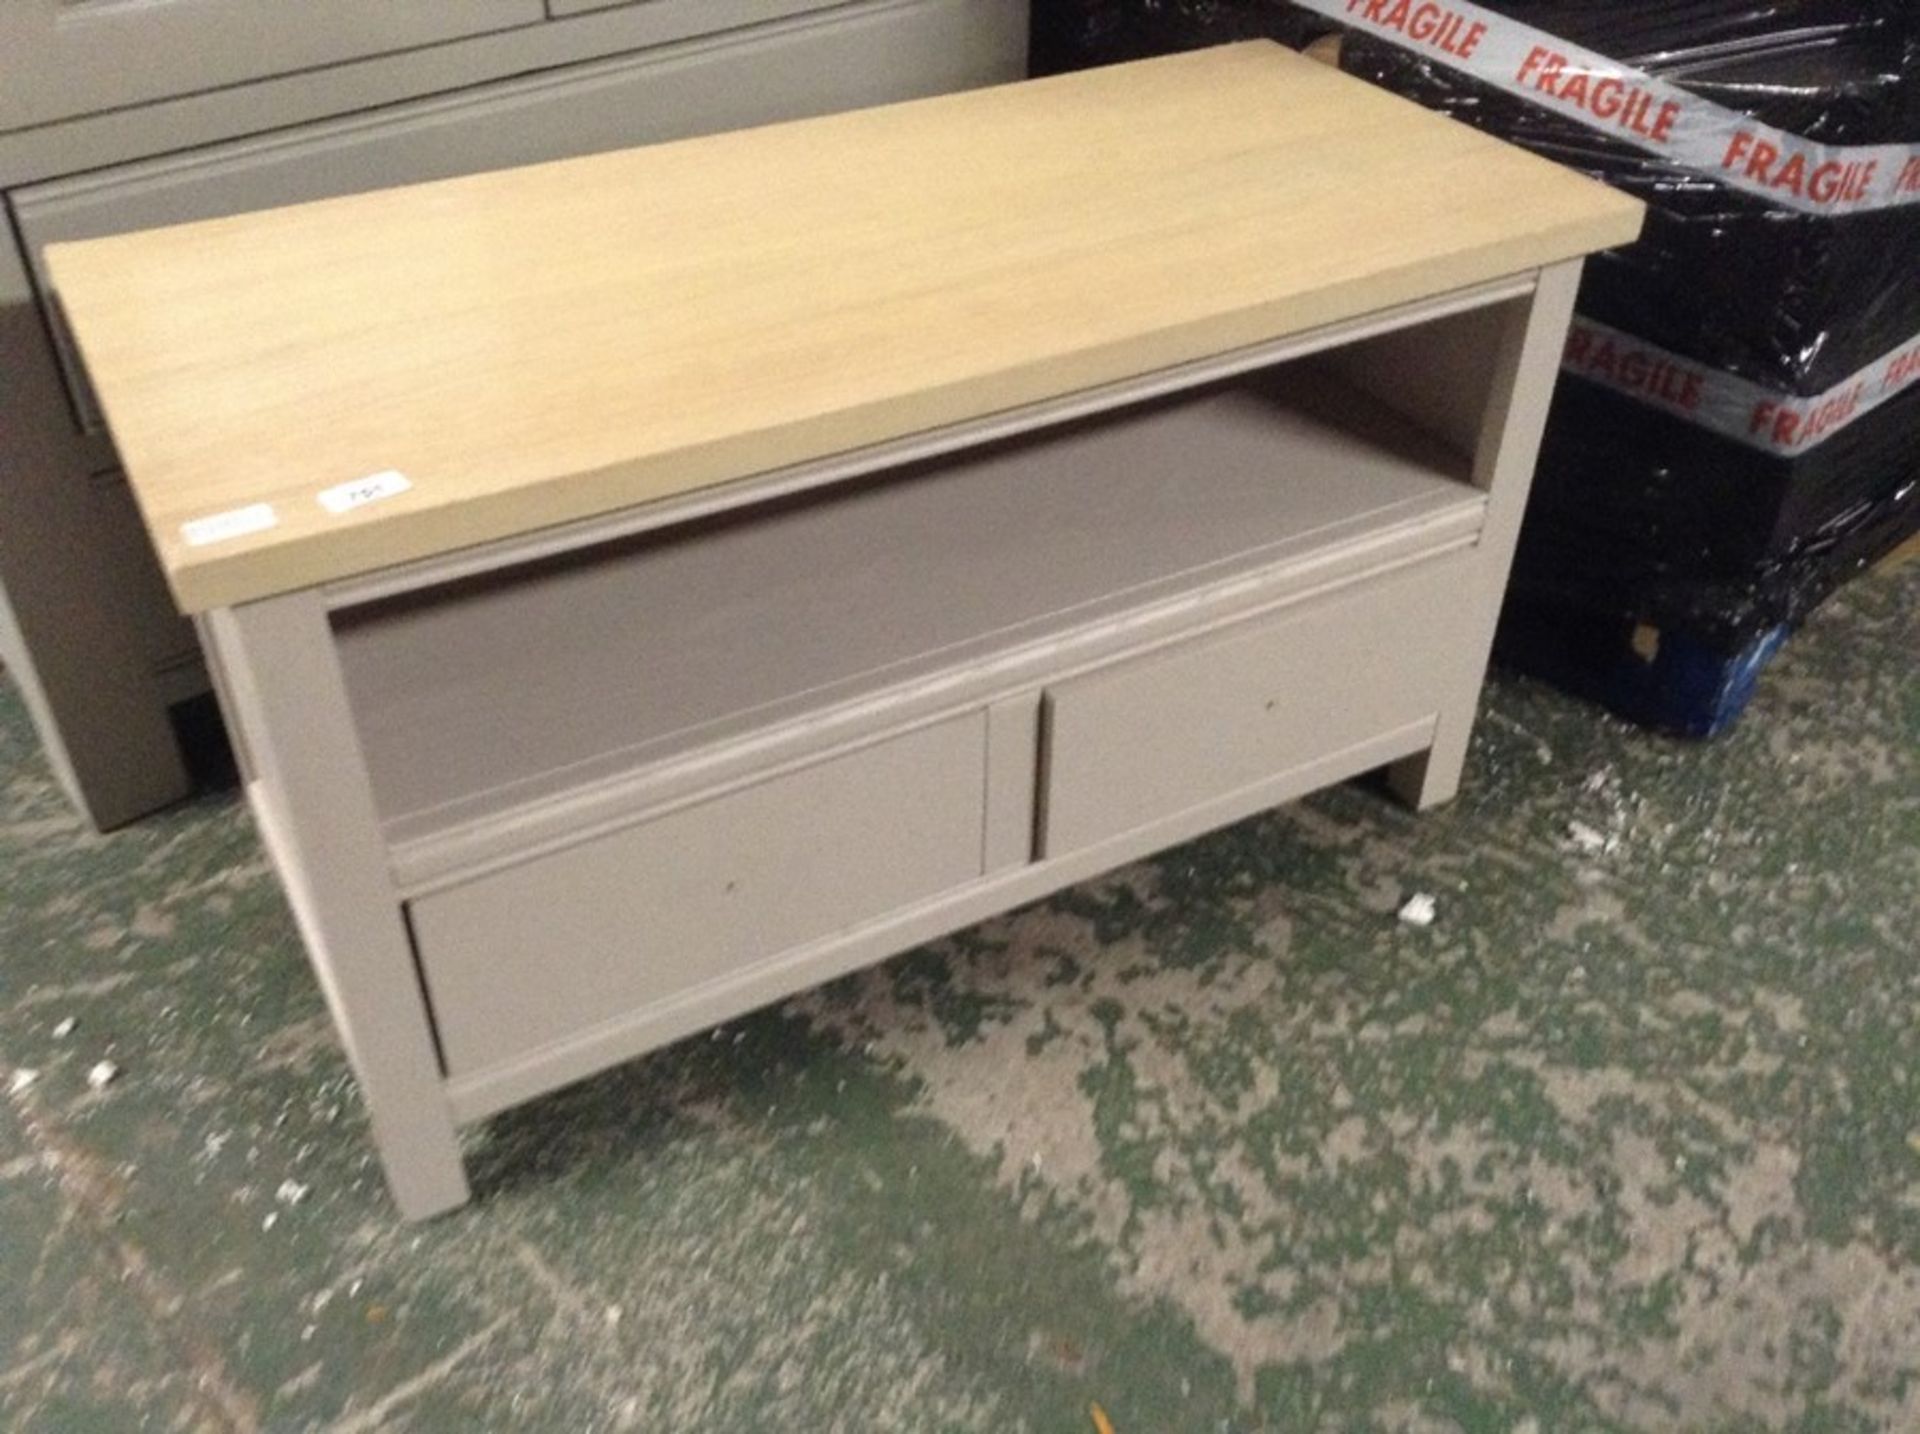 |X1|CORNDELL Woodstock Small Tv Unit Oak and Painted RRP £257|W47-AUCTION1-3 COR-WCH4426|DAMAGE|